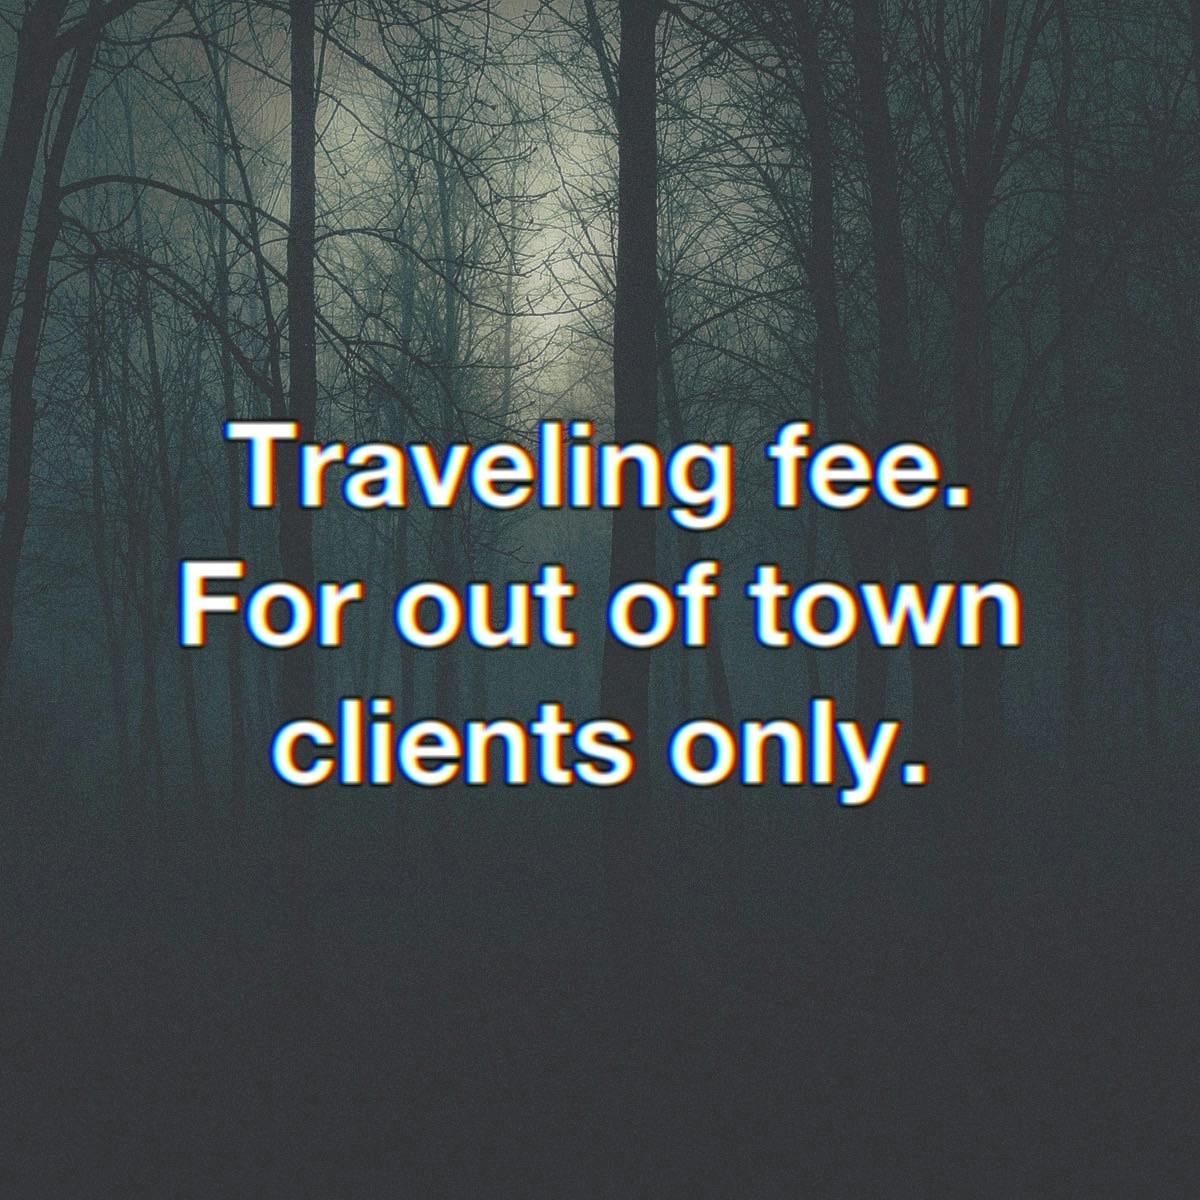 Out of town traveling fee